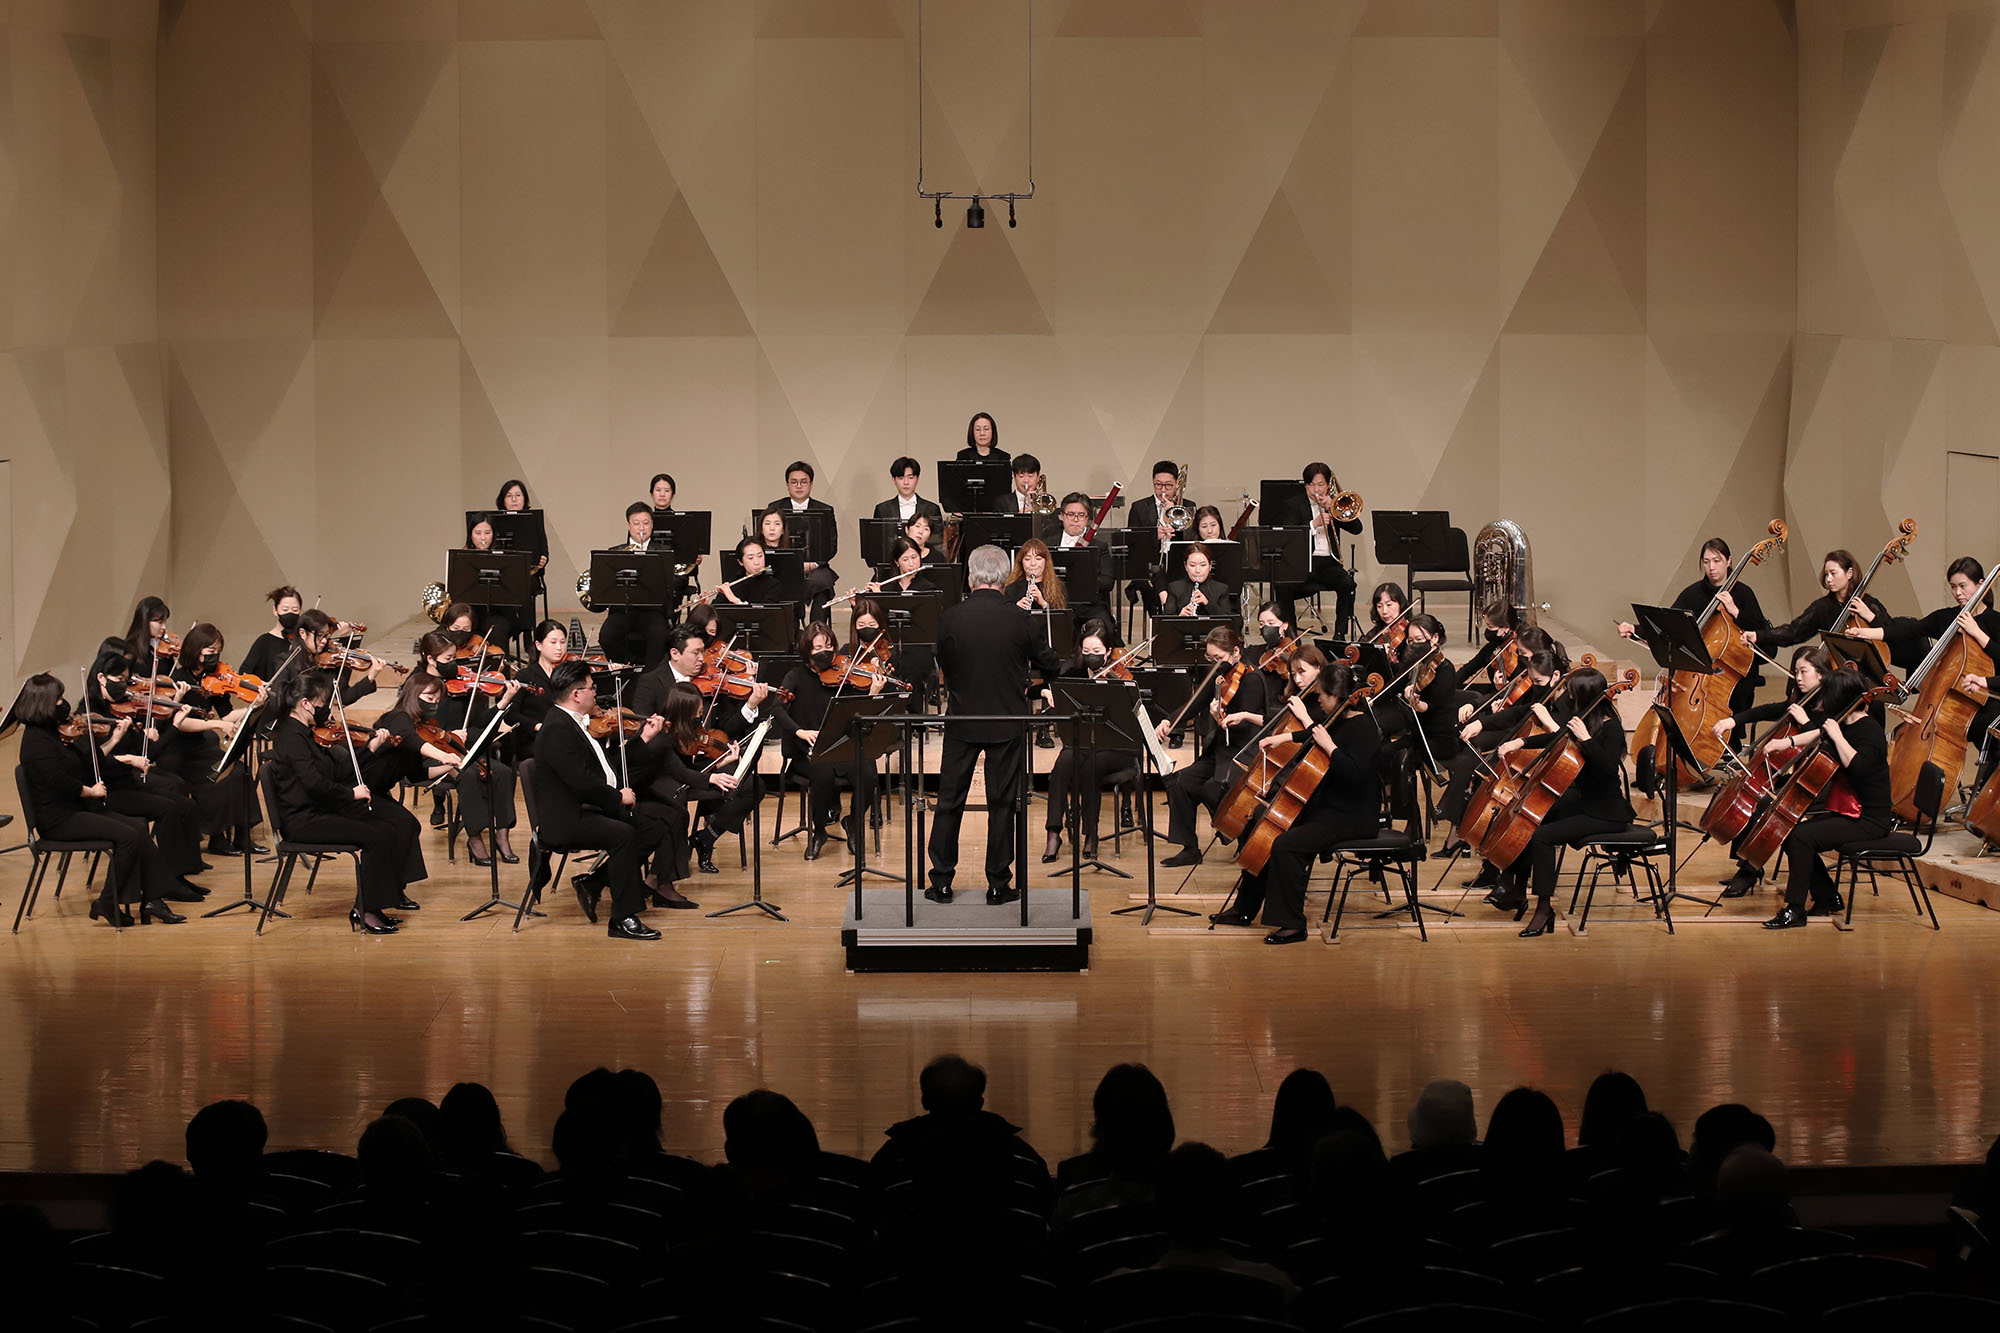 [2.24]  Bucheon Philharmonic Orchestra 300th Subscription Concert - Heroic Beethoven